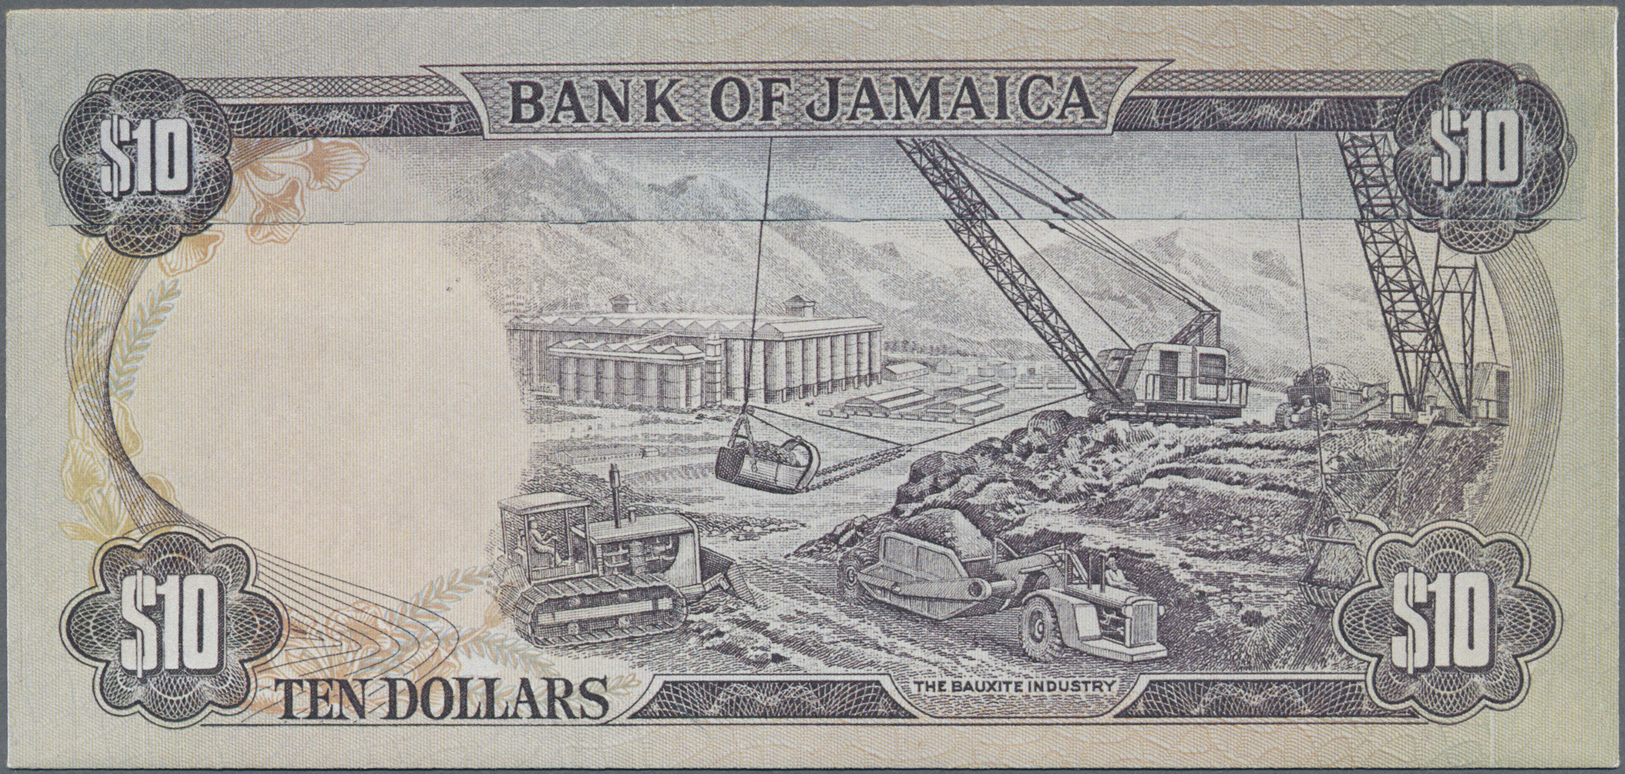 01299 Jamaica: Offical First Day Cover Album of the Bank of Jamaica, with certificate, containing 4 First Day Covers wit